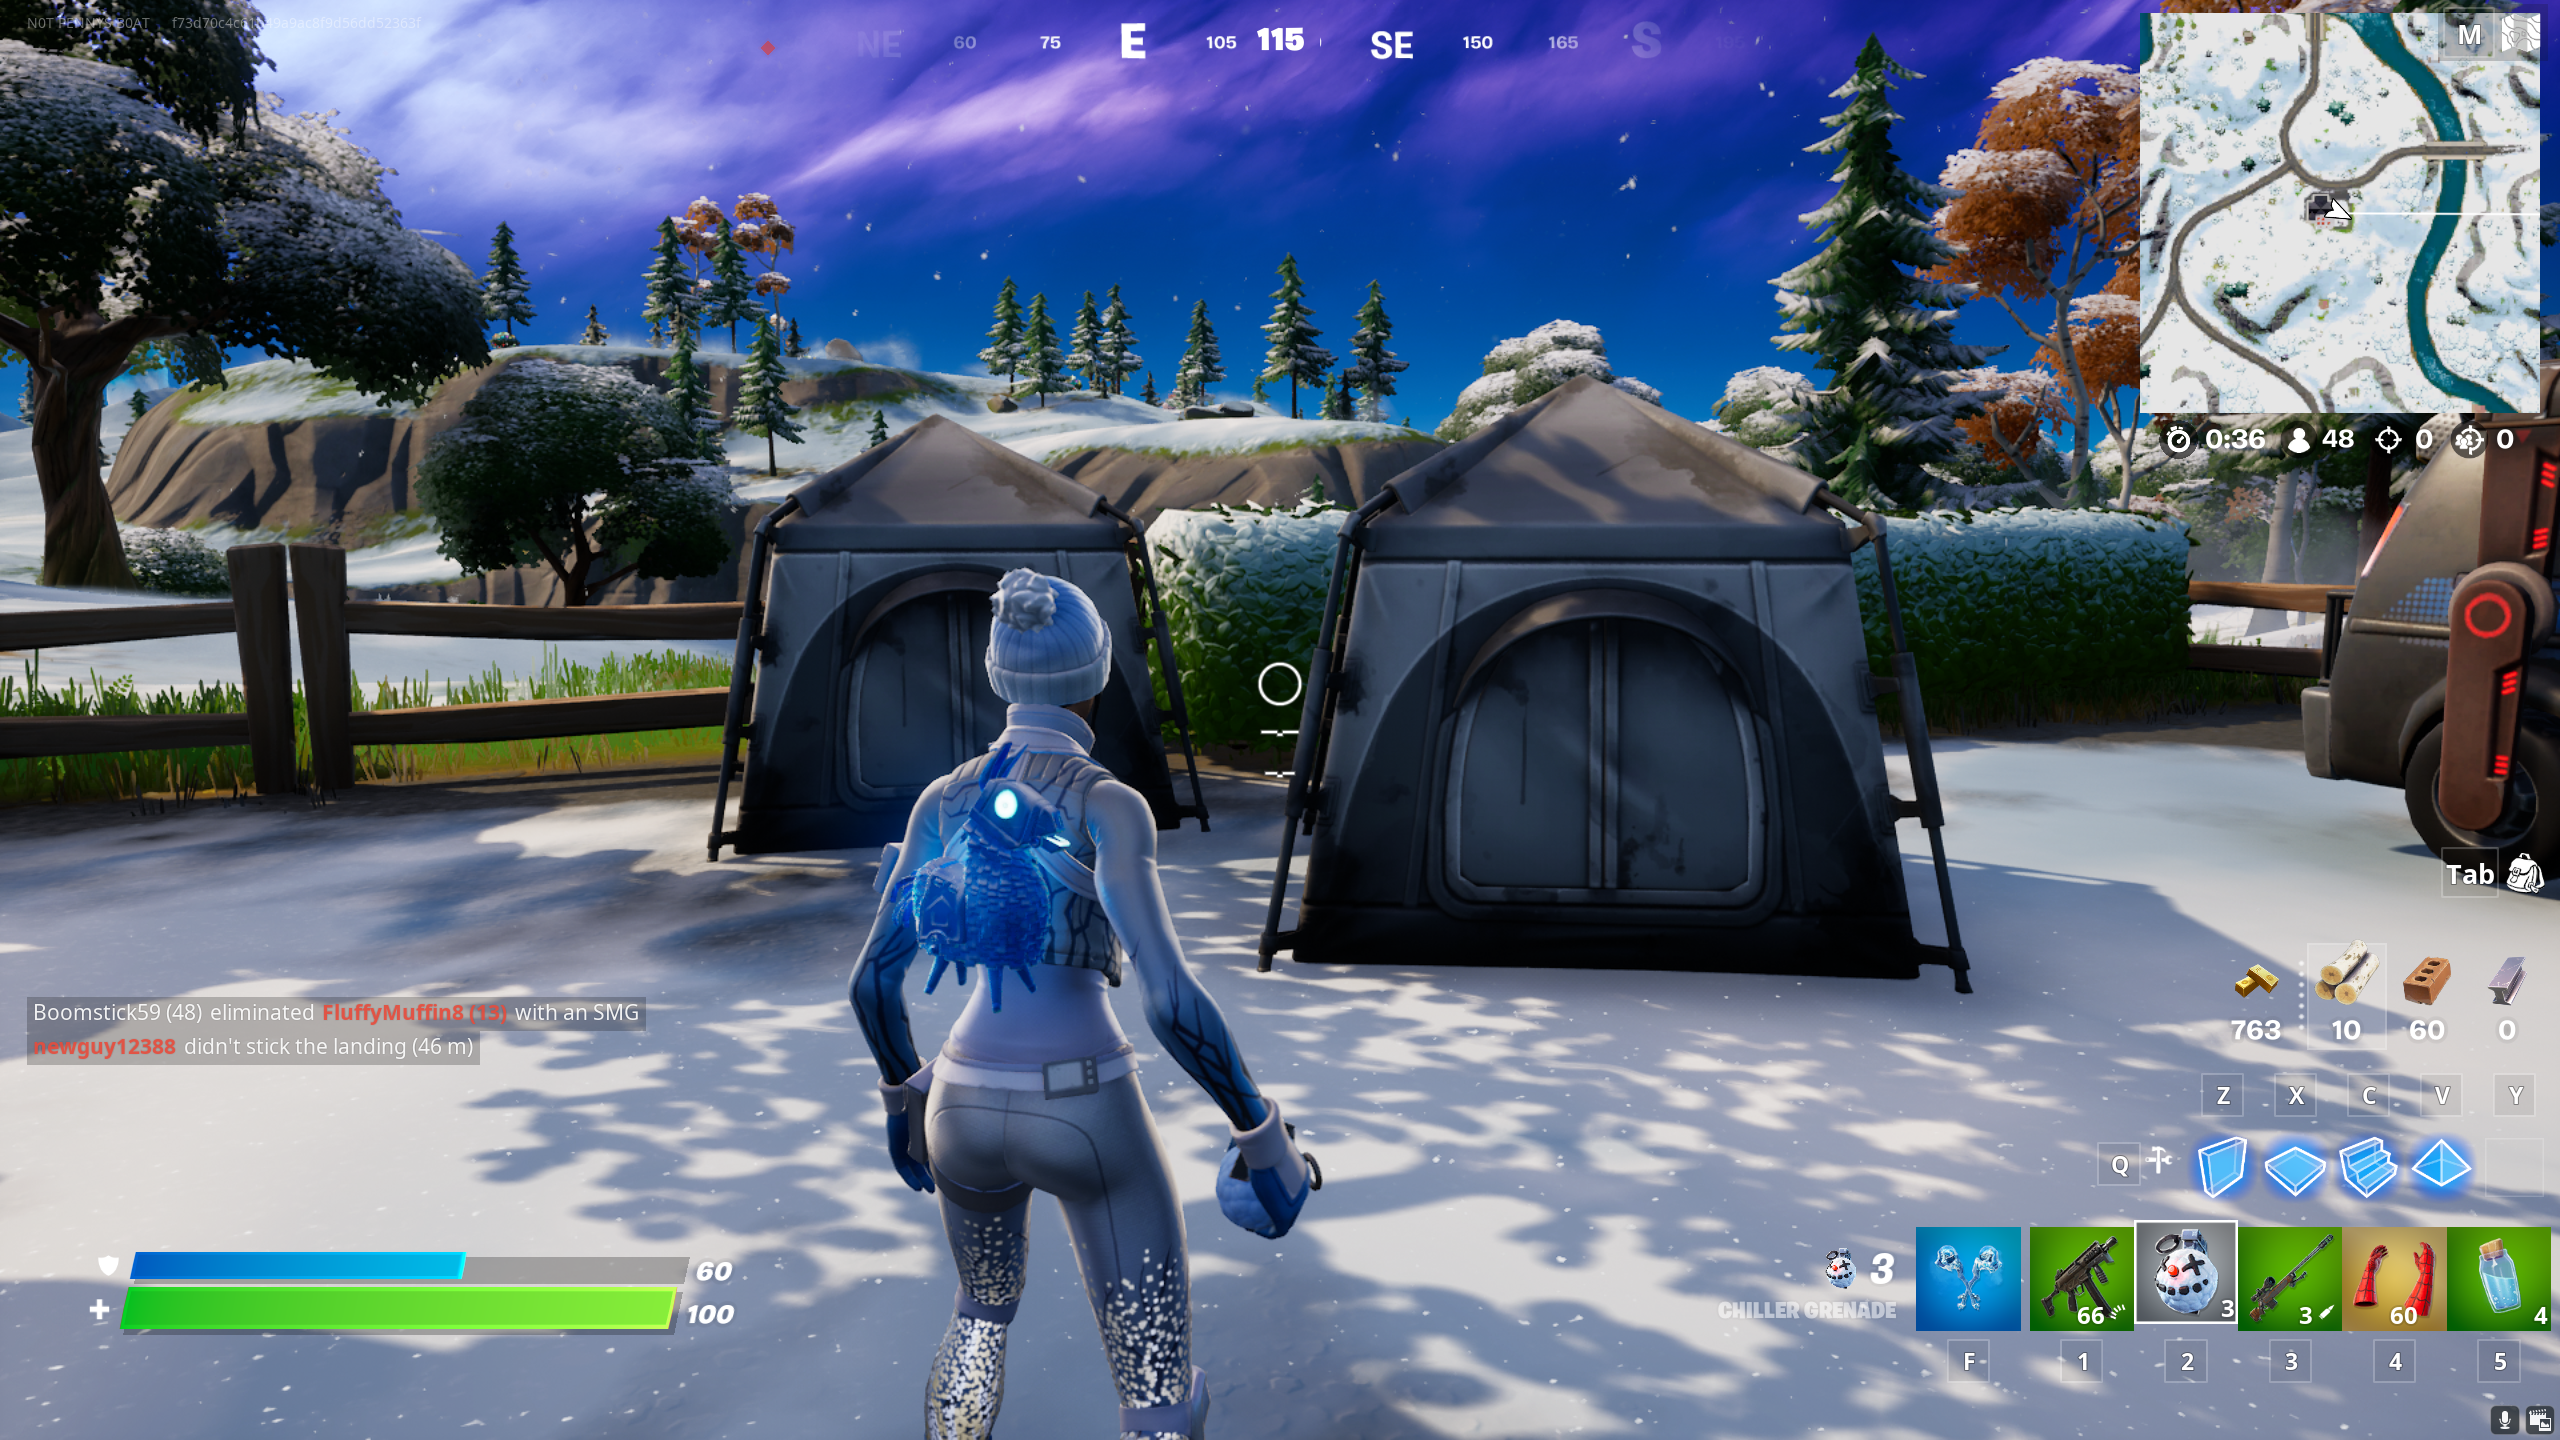 Abandoned tents are semi-randomized, but there are ways to better your chance of finding them.